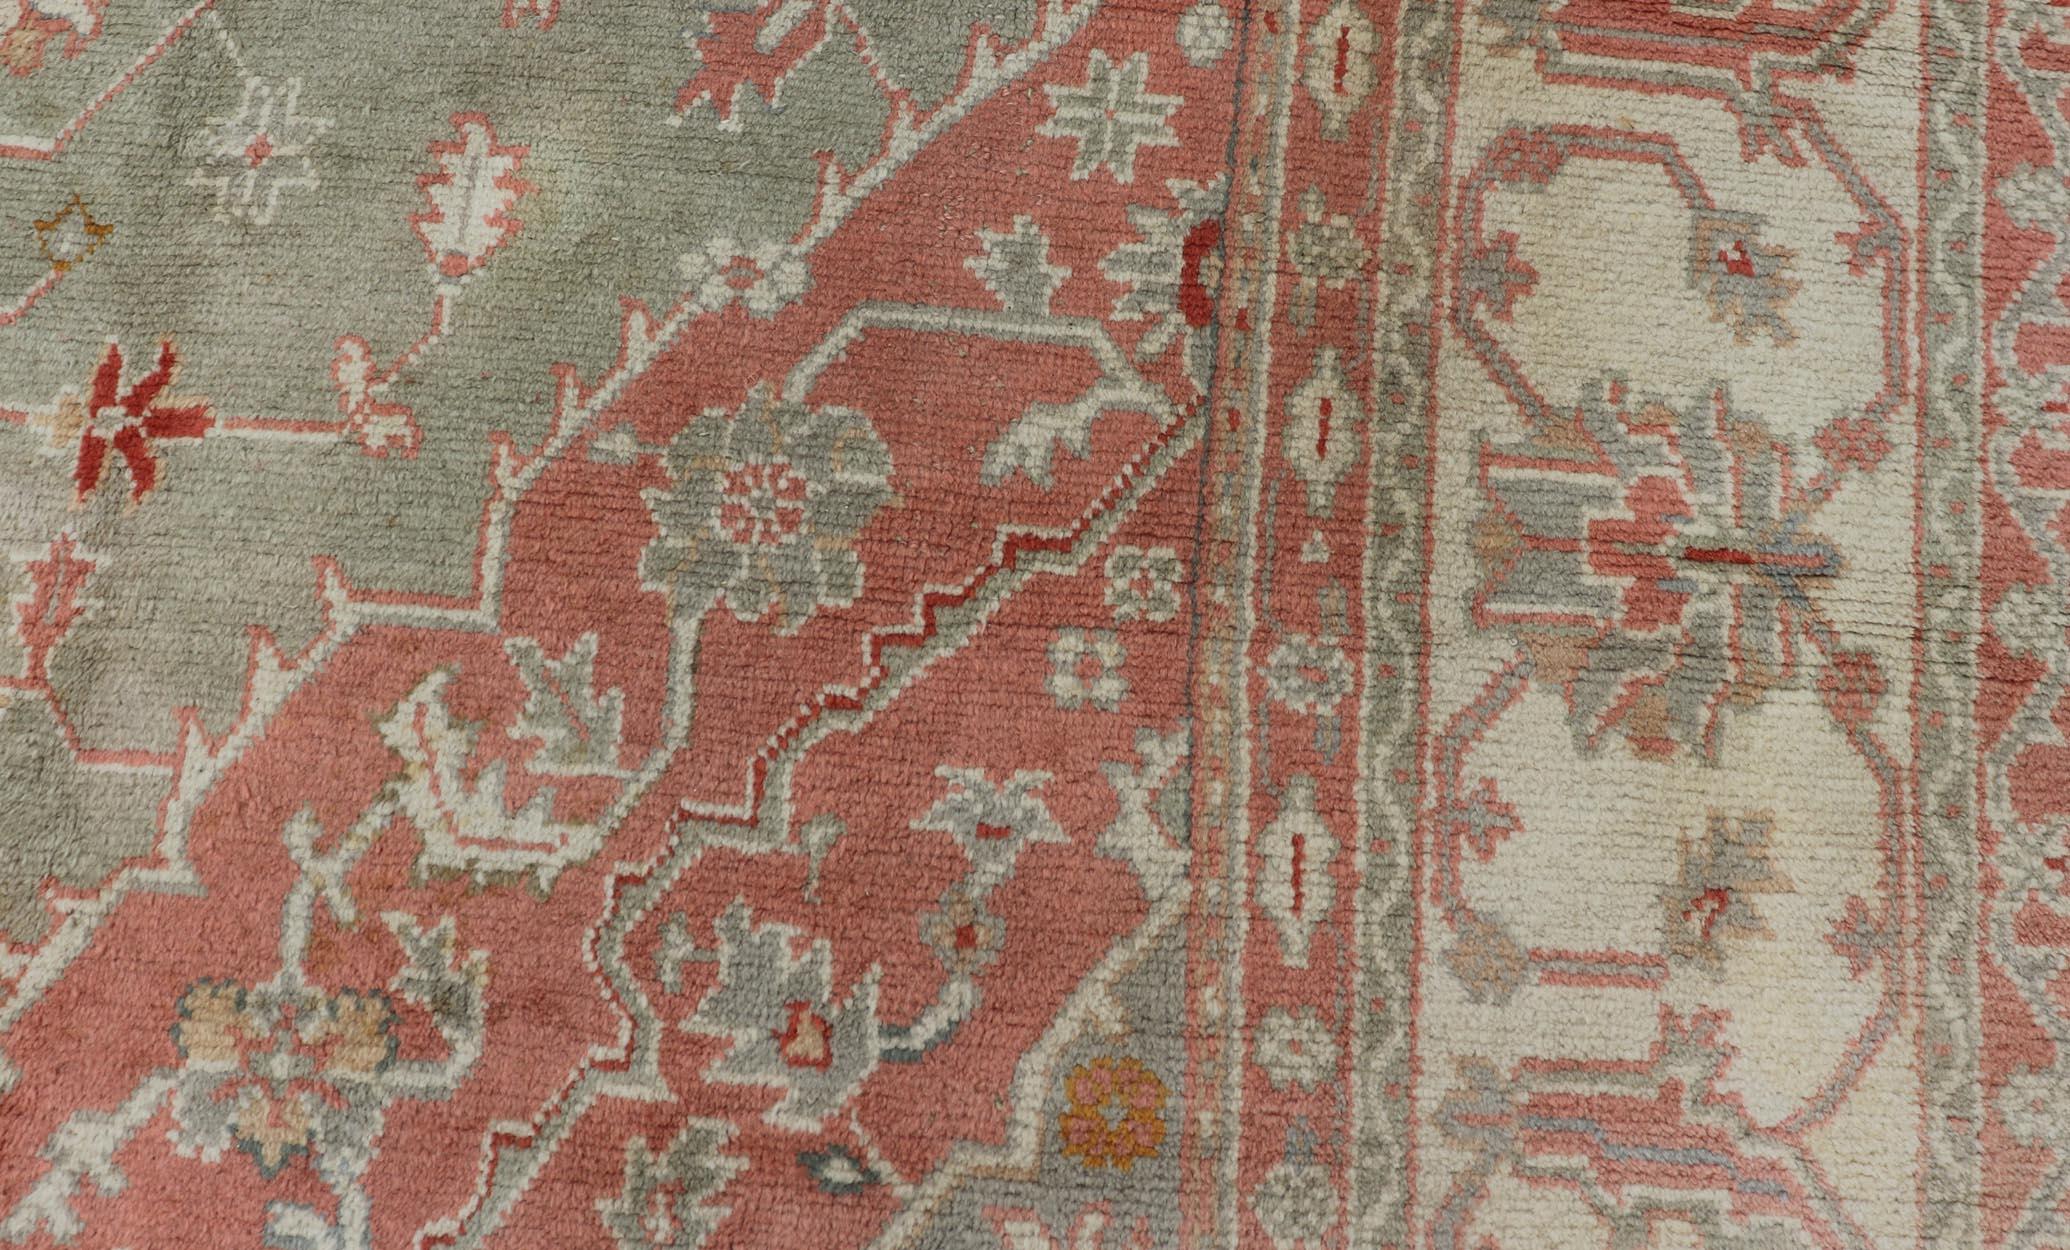 Antique Turkish Oushak rug with floral design in light green and soft pink. Keivan Woven Arts / rug 17-1101, country of origin / type: Turkey / Oushak, circa 1930. 
Measures: 13' x 16'1.
This large antique Turkish Oushak rug bears a light green